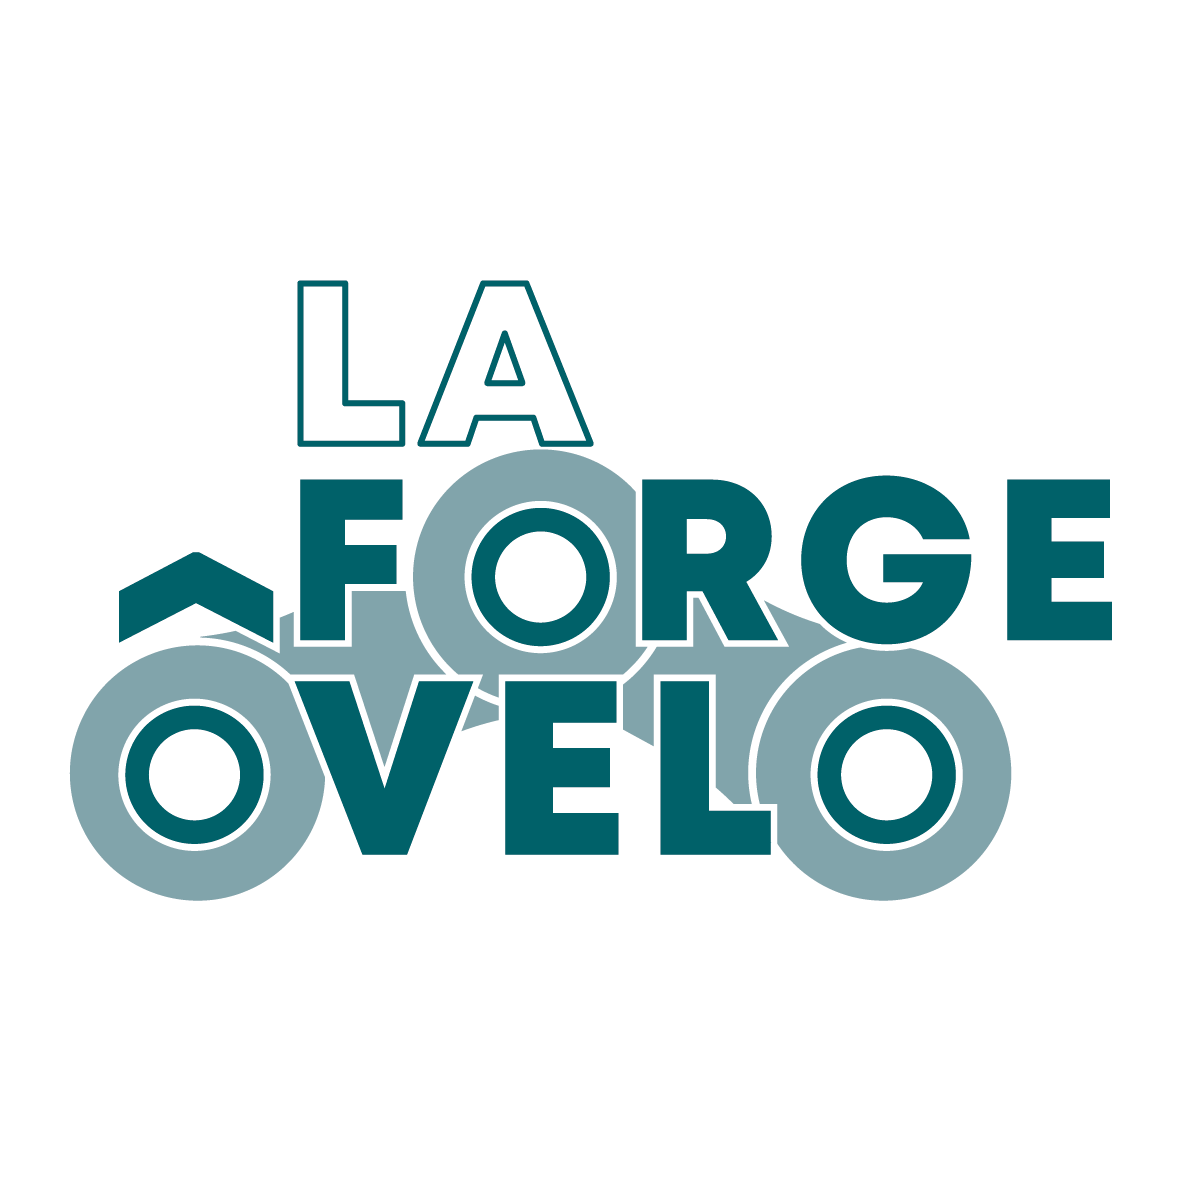 https://www.jurace.ch/images/upload/1713529385-LaForgeOvelo-Fondblanc-s ..png